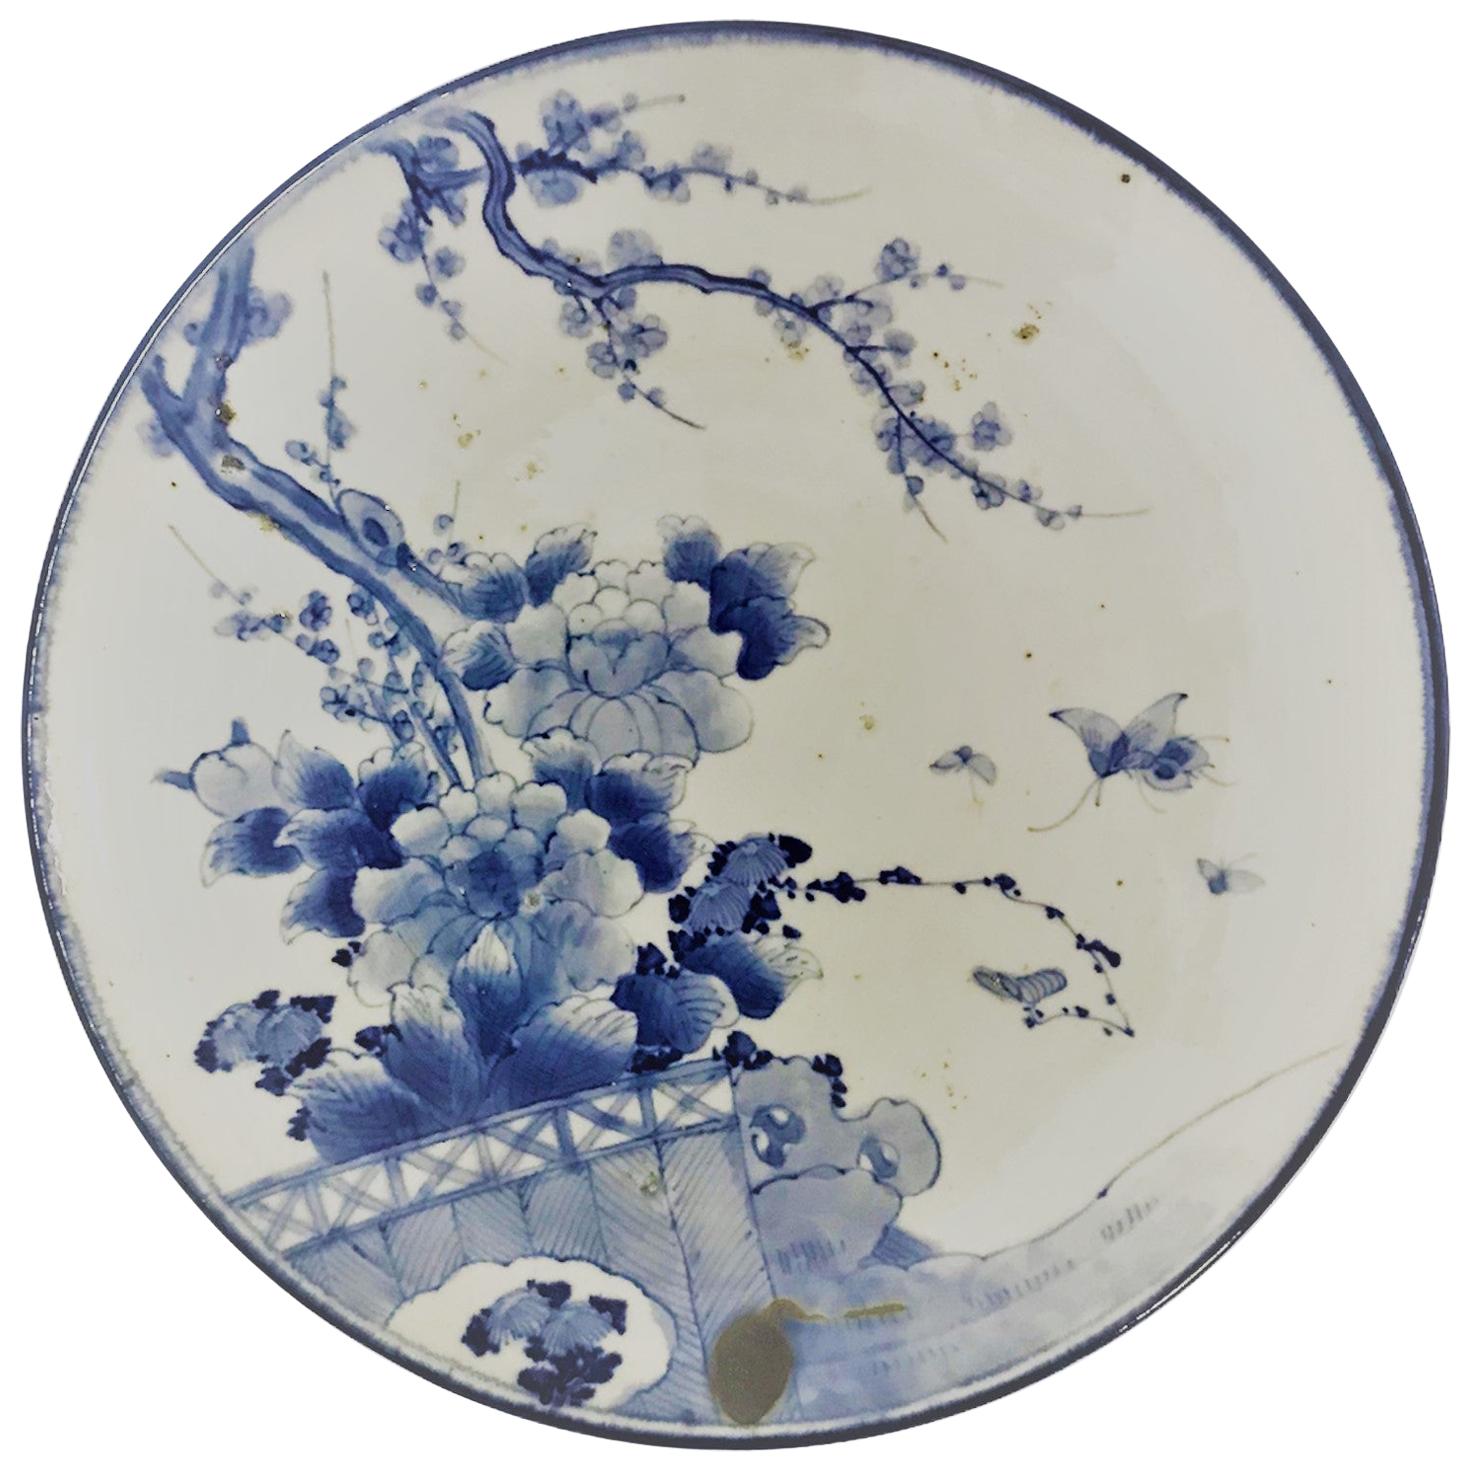 Japanese Blue and White Arita Charger with Butterflies, Peonies and Sakura